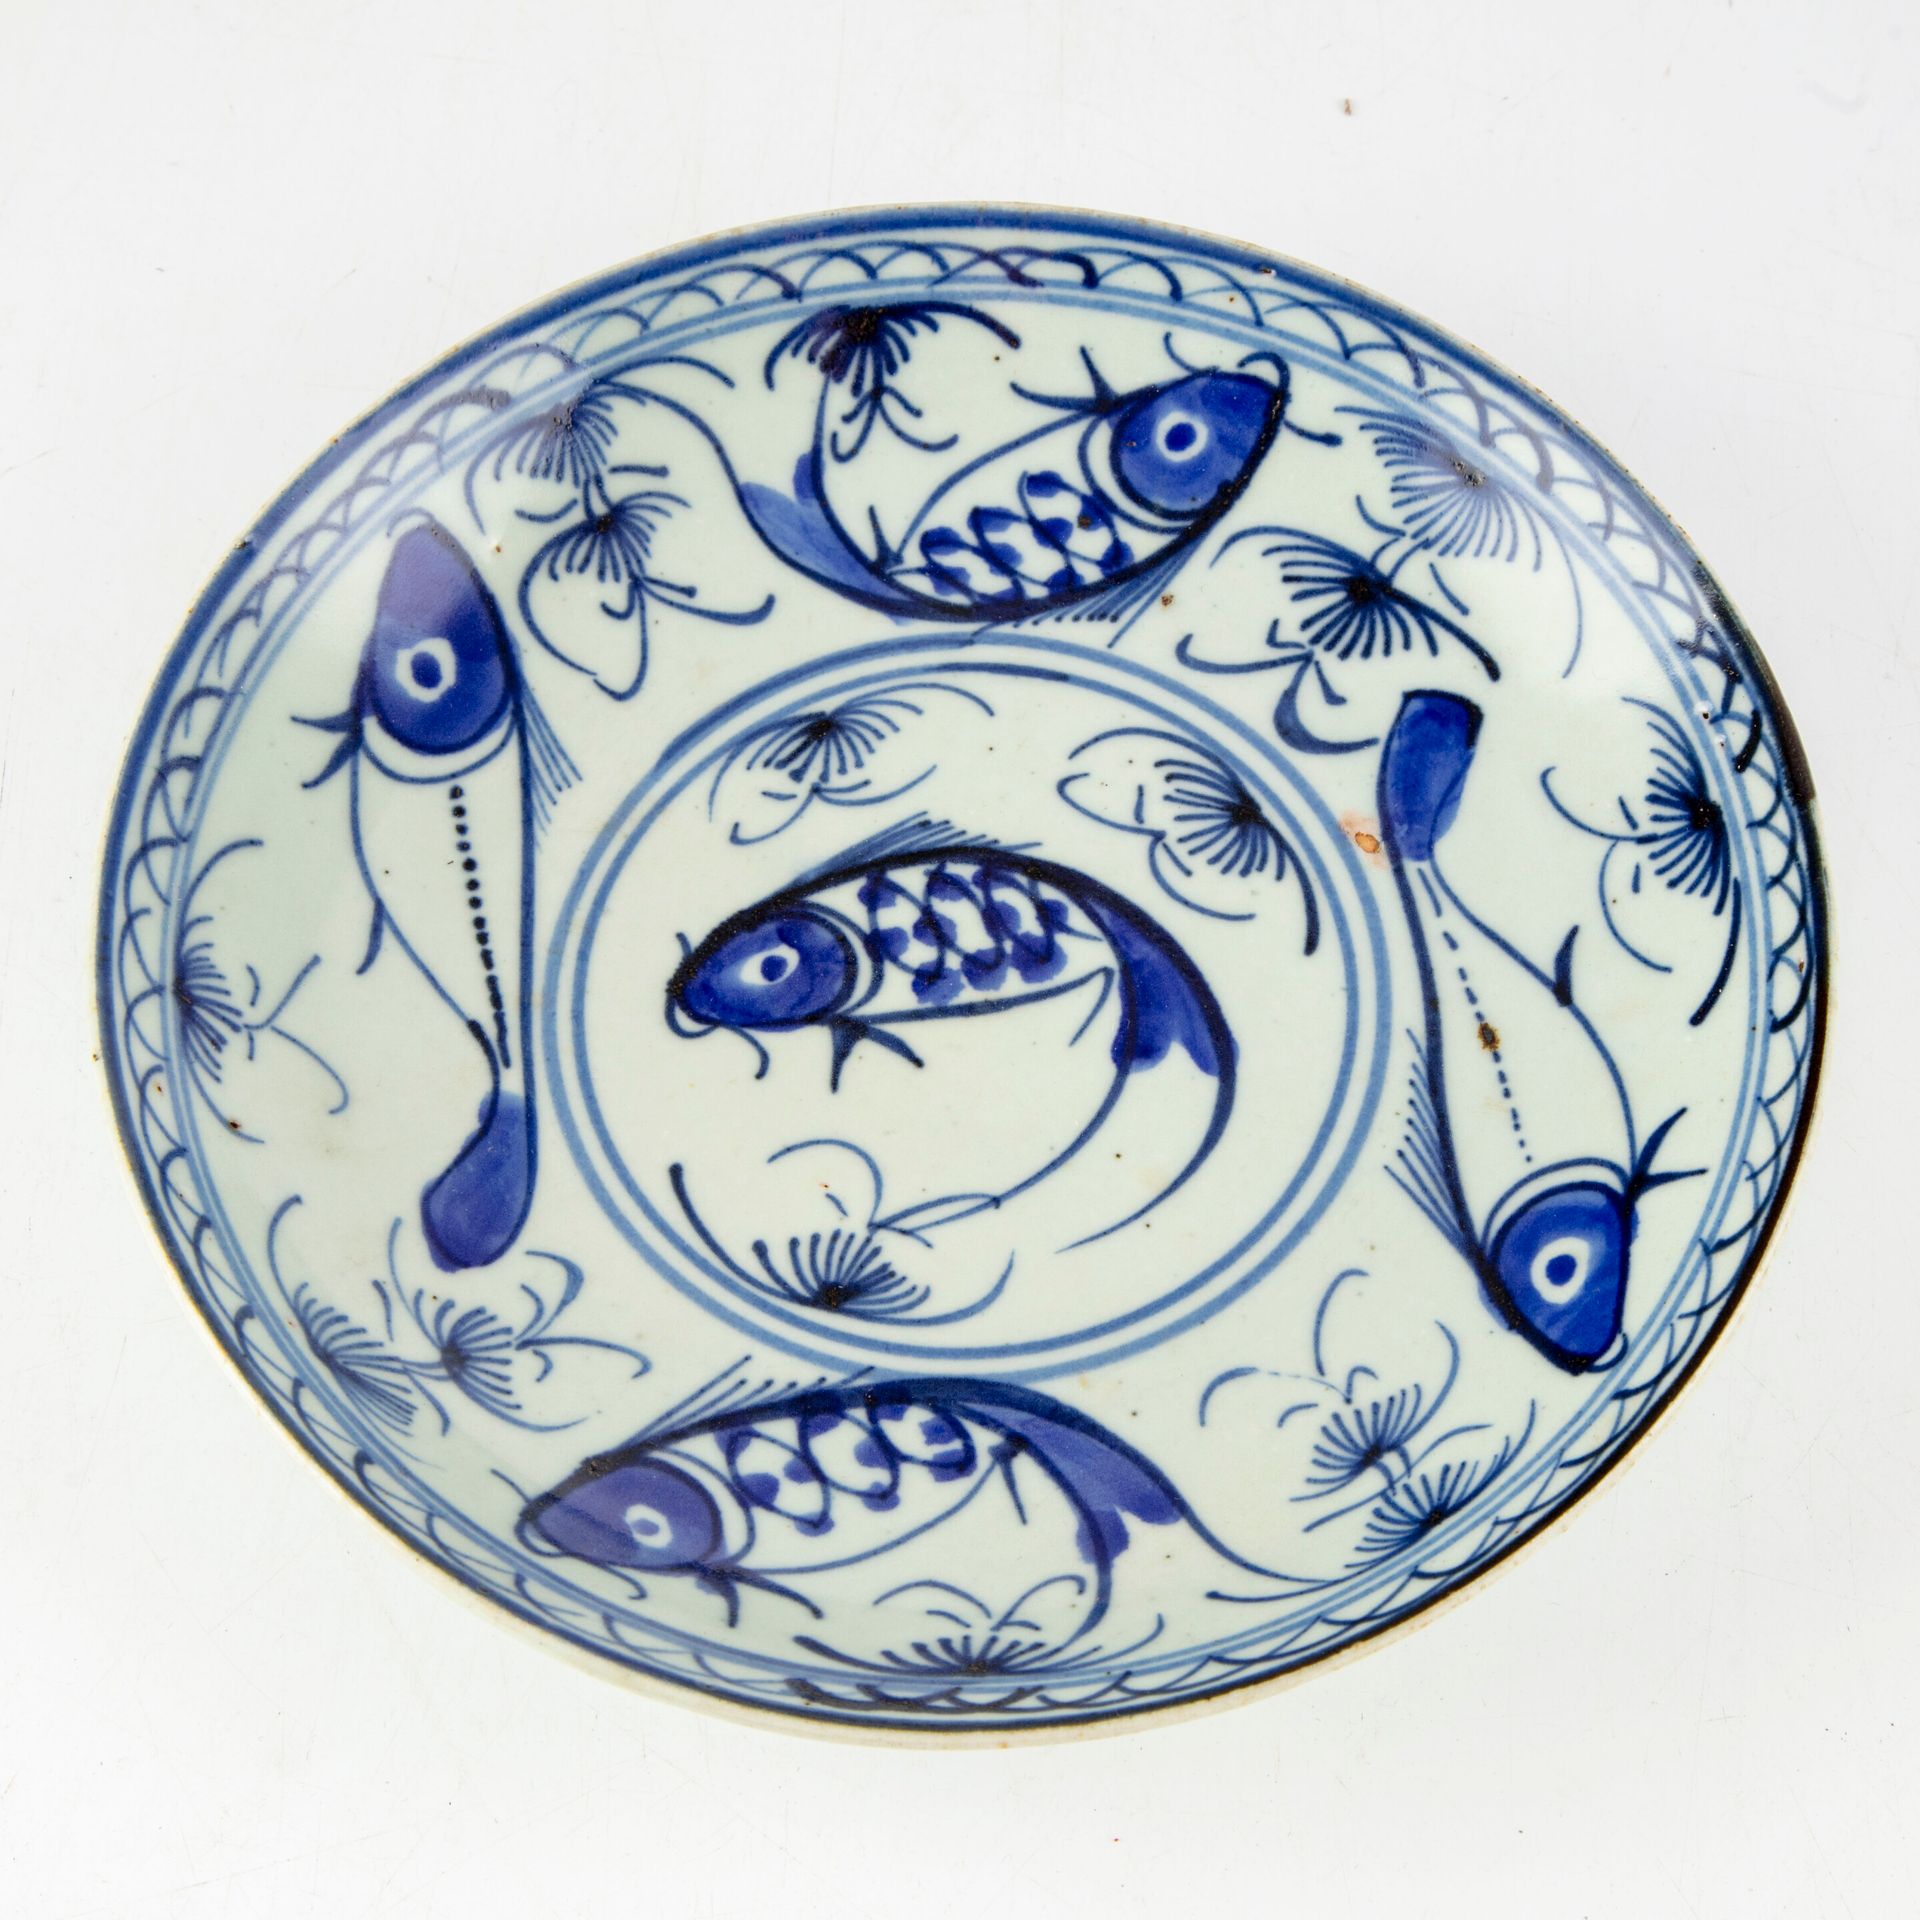 Null Enameled porcelain plate with blue and white fish decoration

Mark under th&hellip;